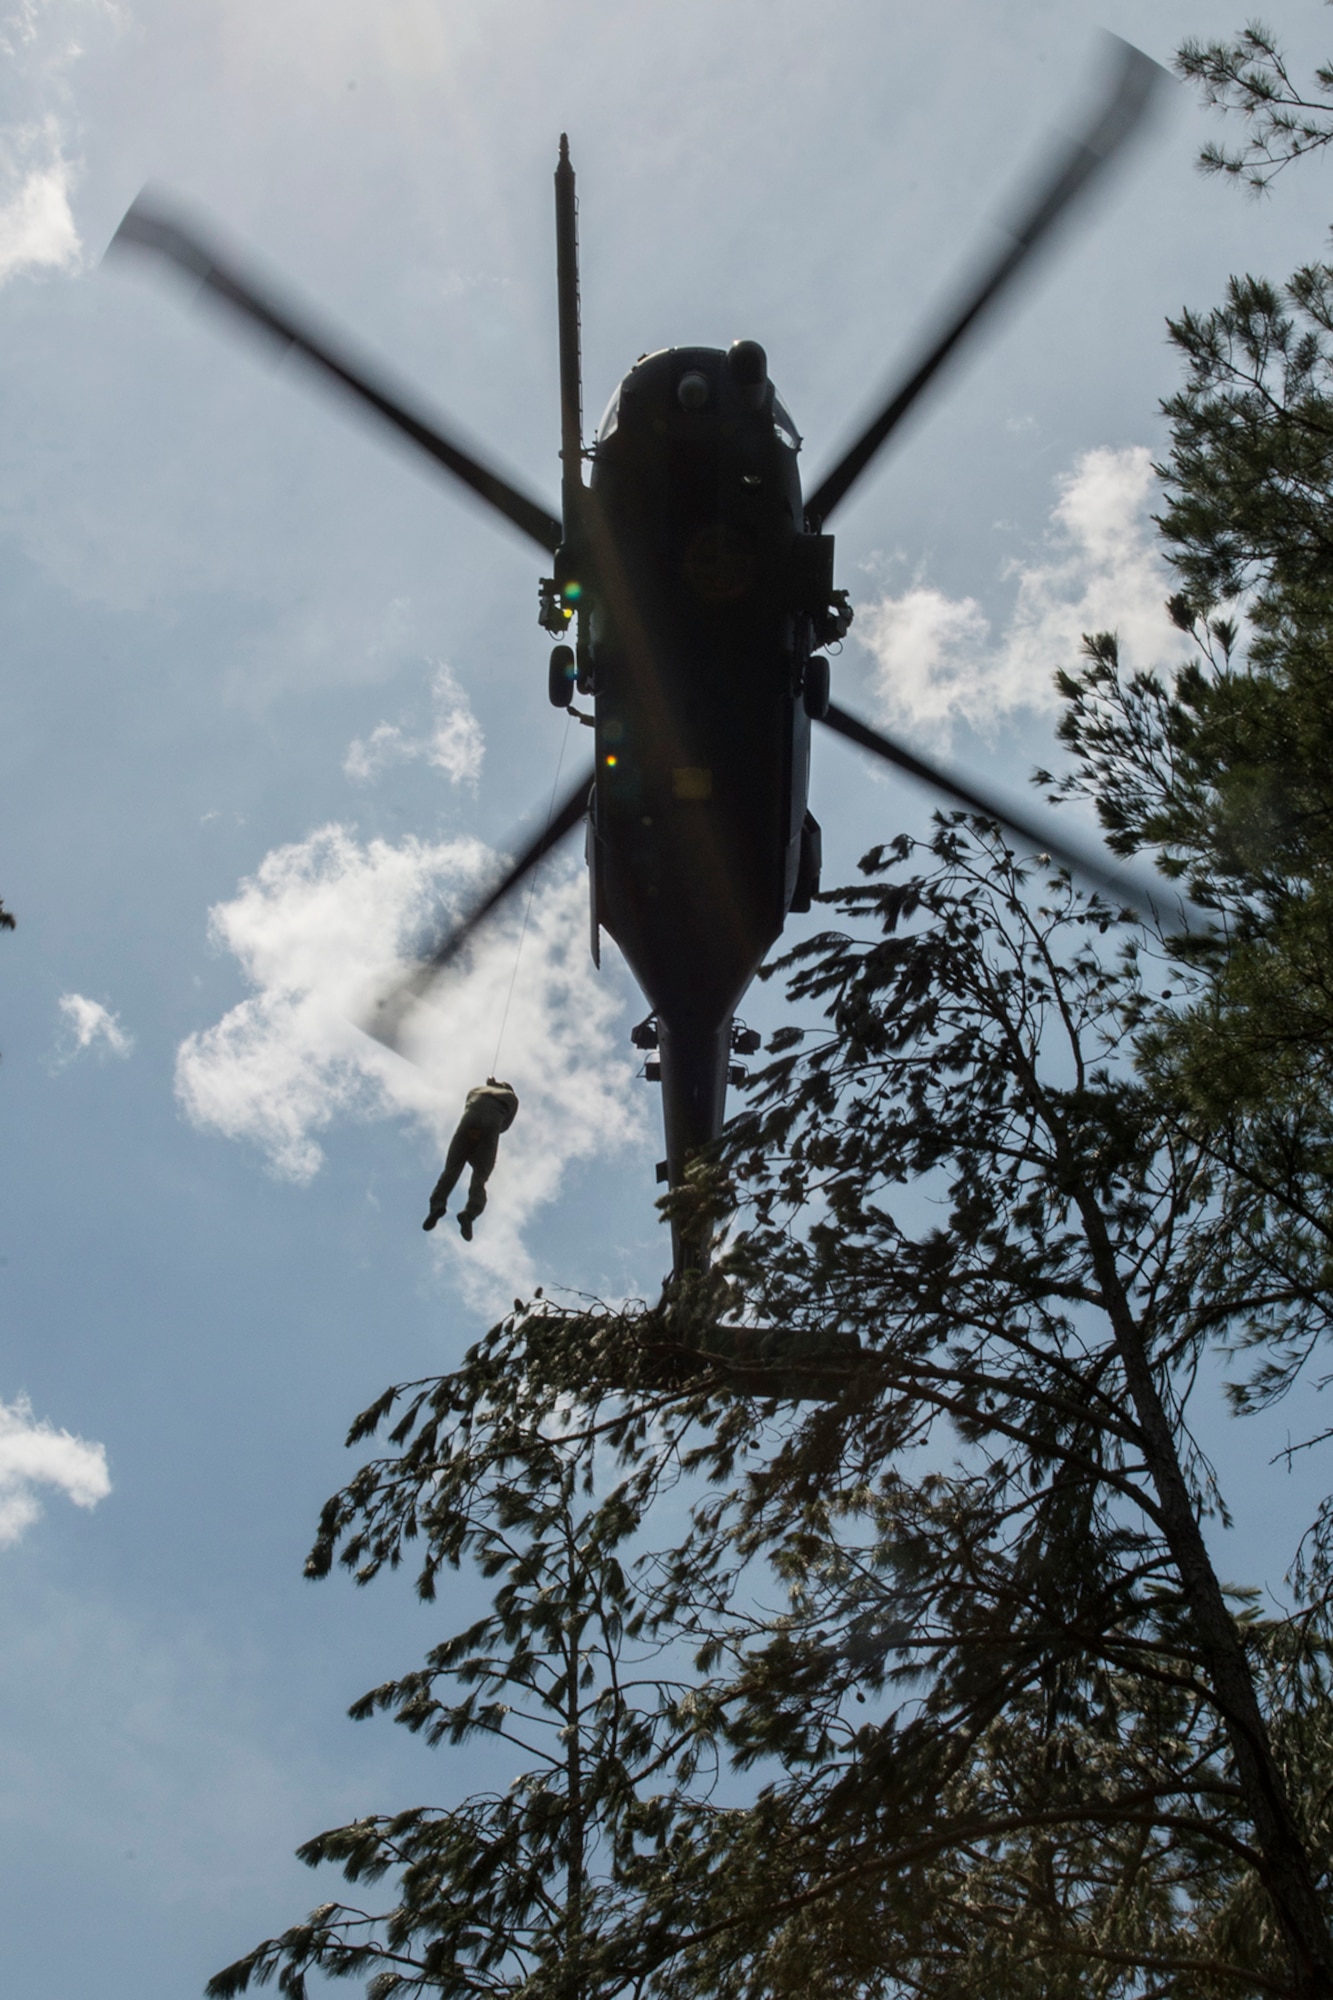 U.S. Air Force Lt. Col. Christopher Anderson, the commander of the 307th Operations Support Squadron, is hoisted up to a HH-60 Pave Hawk helicopter during SERE training on May 14, 2016, Claiborne Gunnery and Bombing Range, La. SERE, which stands for Survival, Evasion, Resistance and Escape, is required training for all aircrew members and provides the knowledge and tools necessary to survive on their own in any environment and under any condition should they have to abandon their aircraft. (U.S. Air Force photo by Master Sgt. Greg Steele/Released)